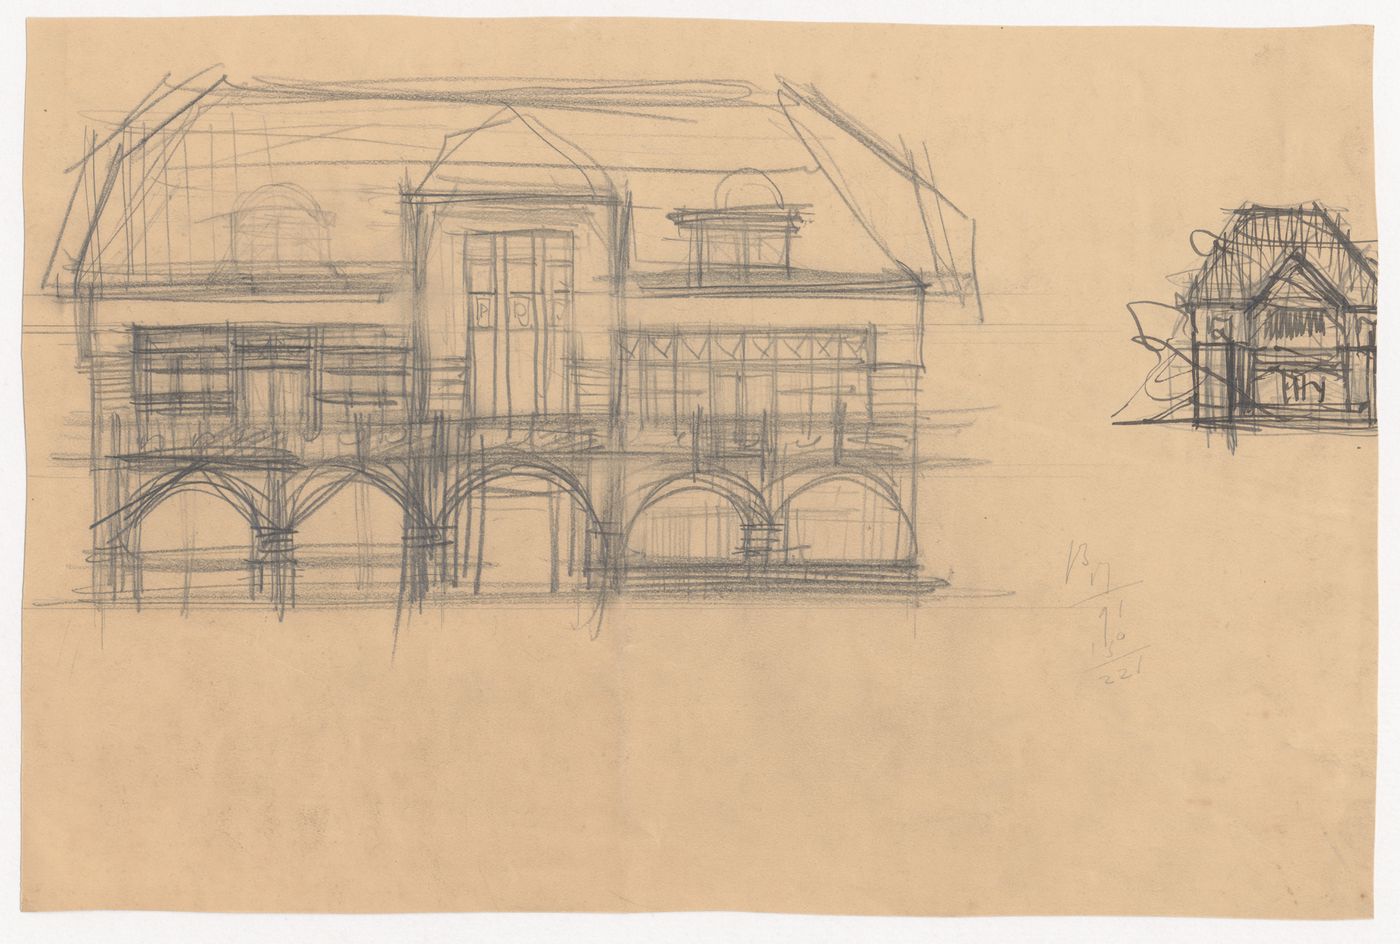 Sketch elevations, possibly for a house, Netherlands; verso: Sketch elevations, possibly for a house, Netherlands